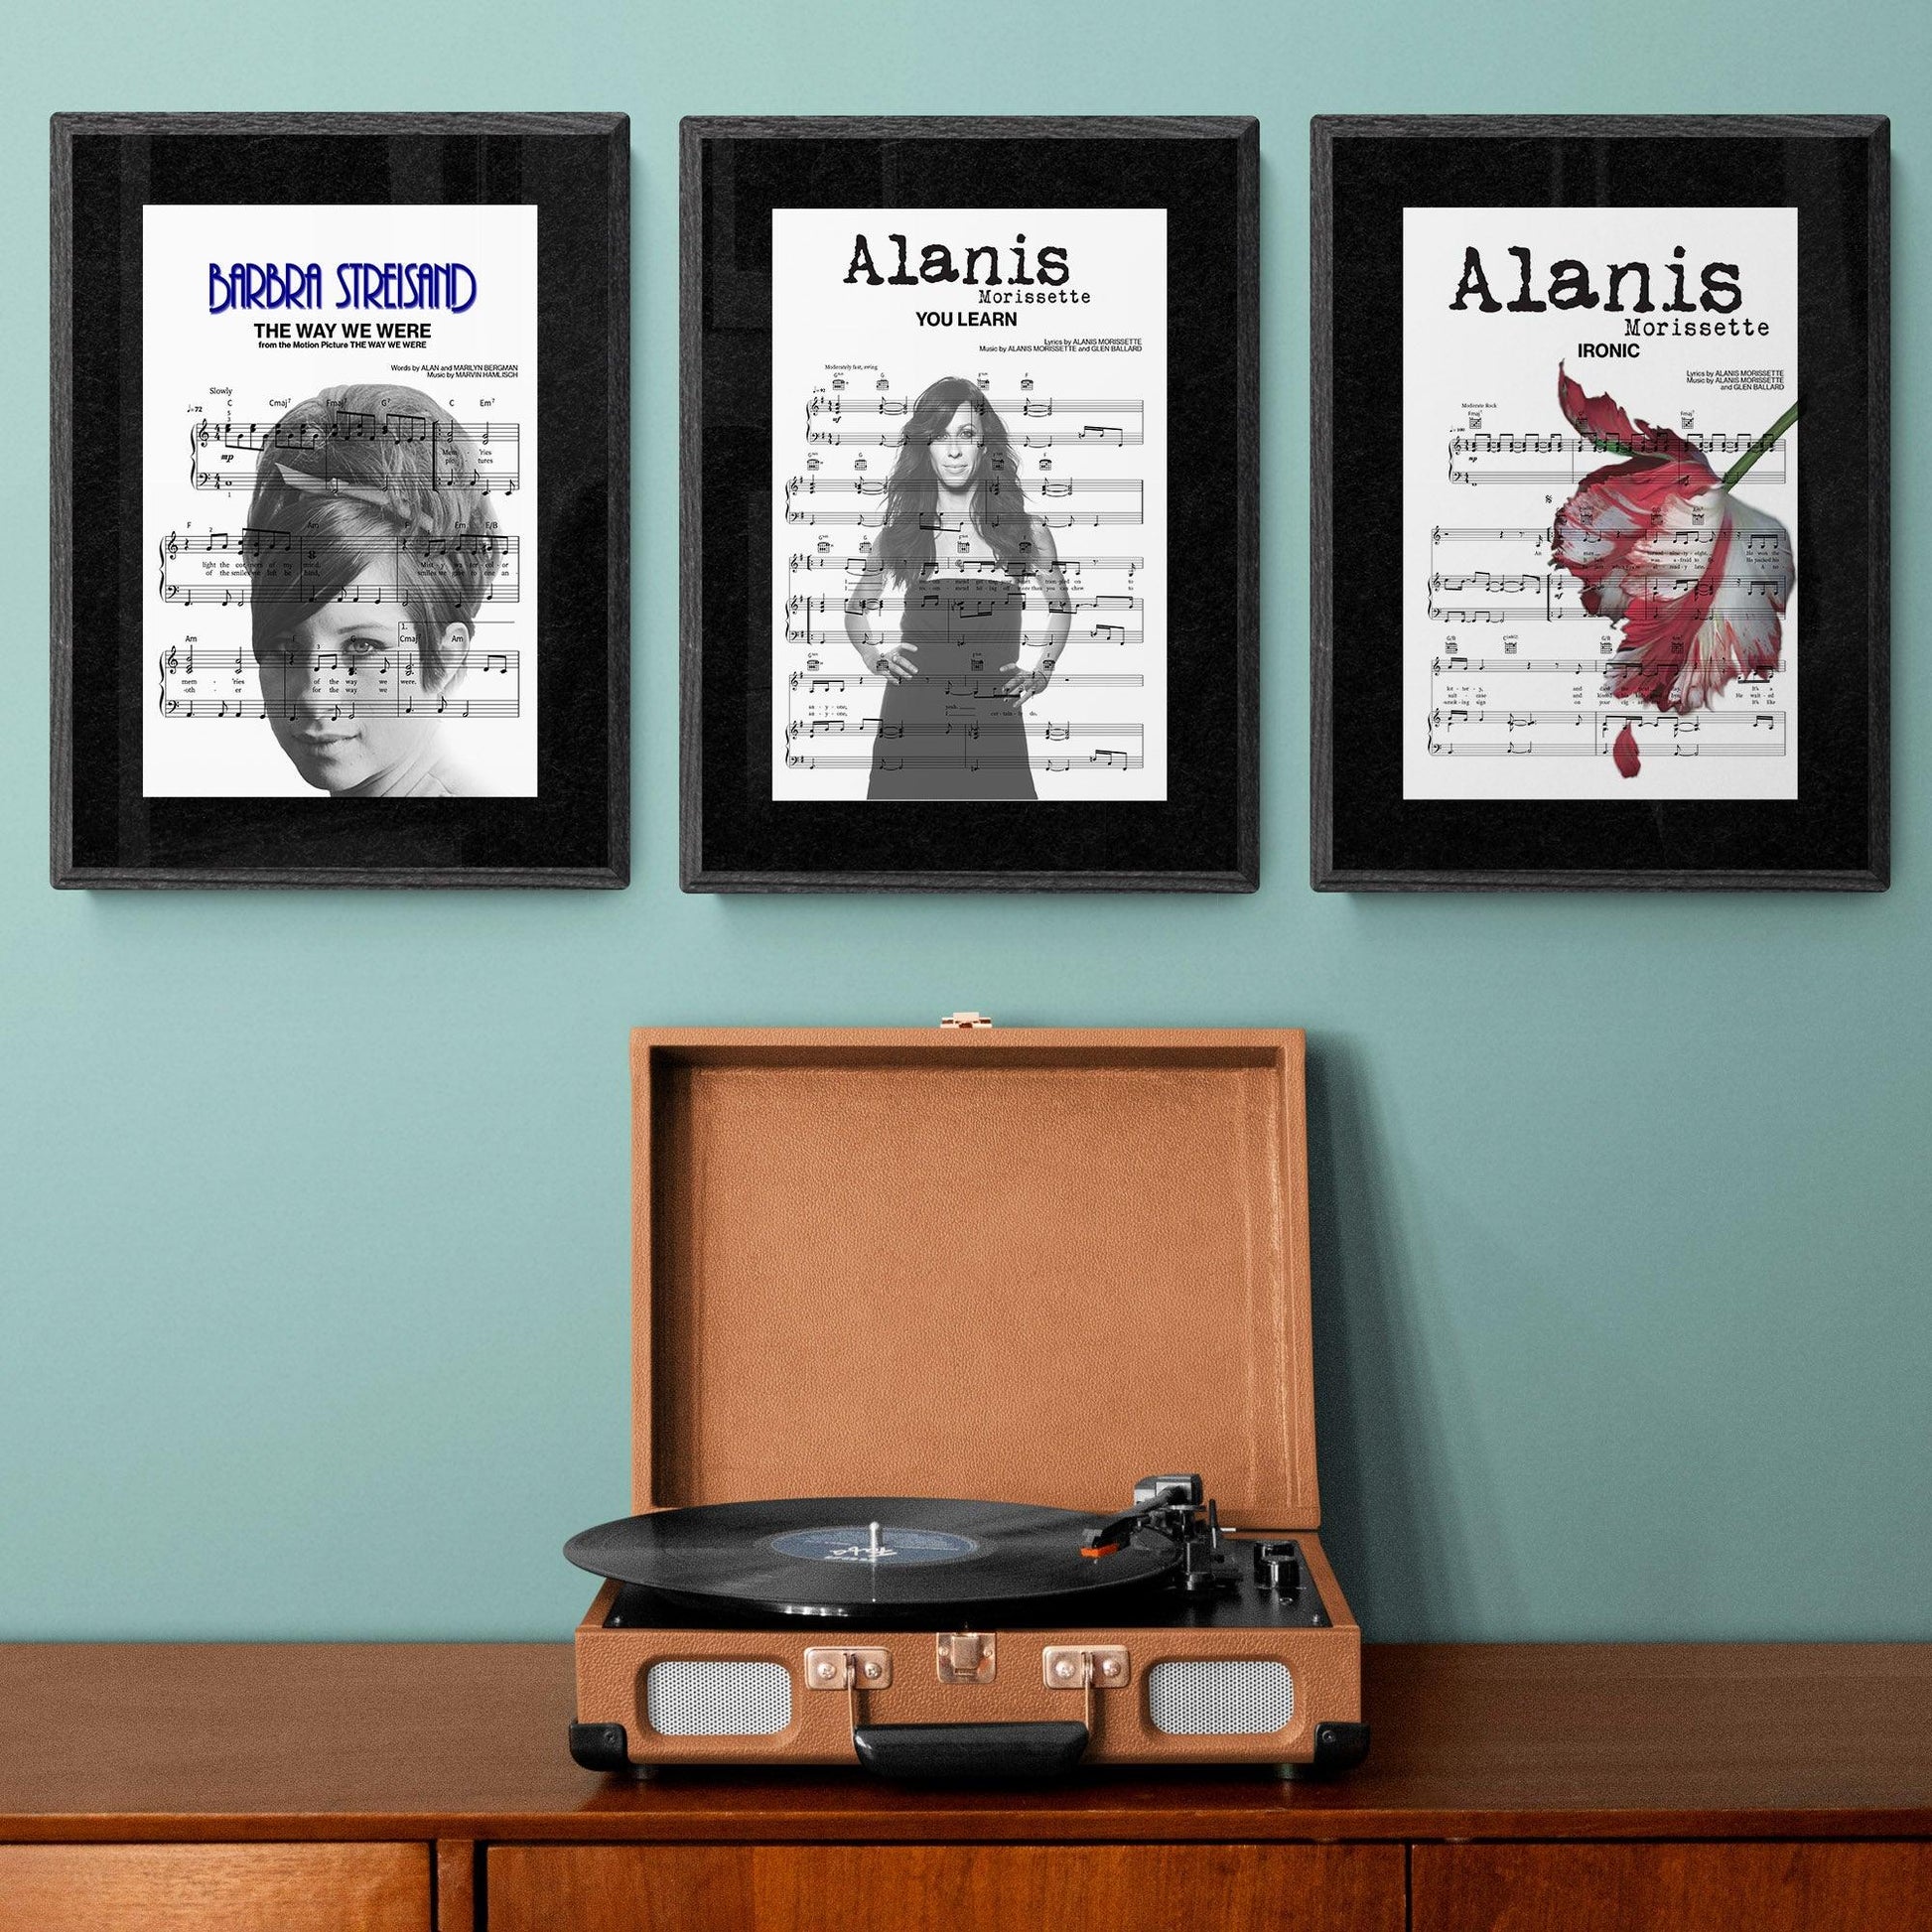 Alanis Morissette - Ironic Song Print | Song Music Sheet Notes Print Everyone has a favorite song especially Alanis Morissette Print and now you can show the score as printed staff. The personal favorite song sheet print shows the song chosen as the score. 